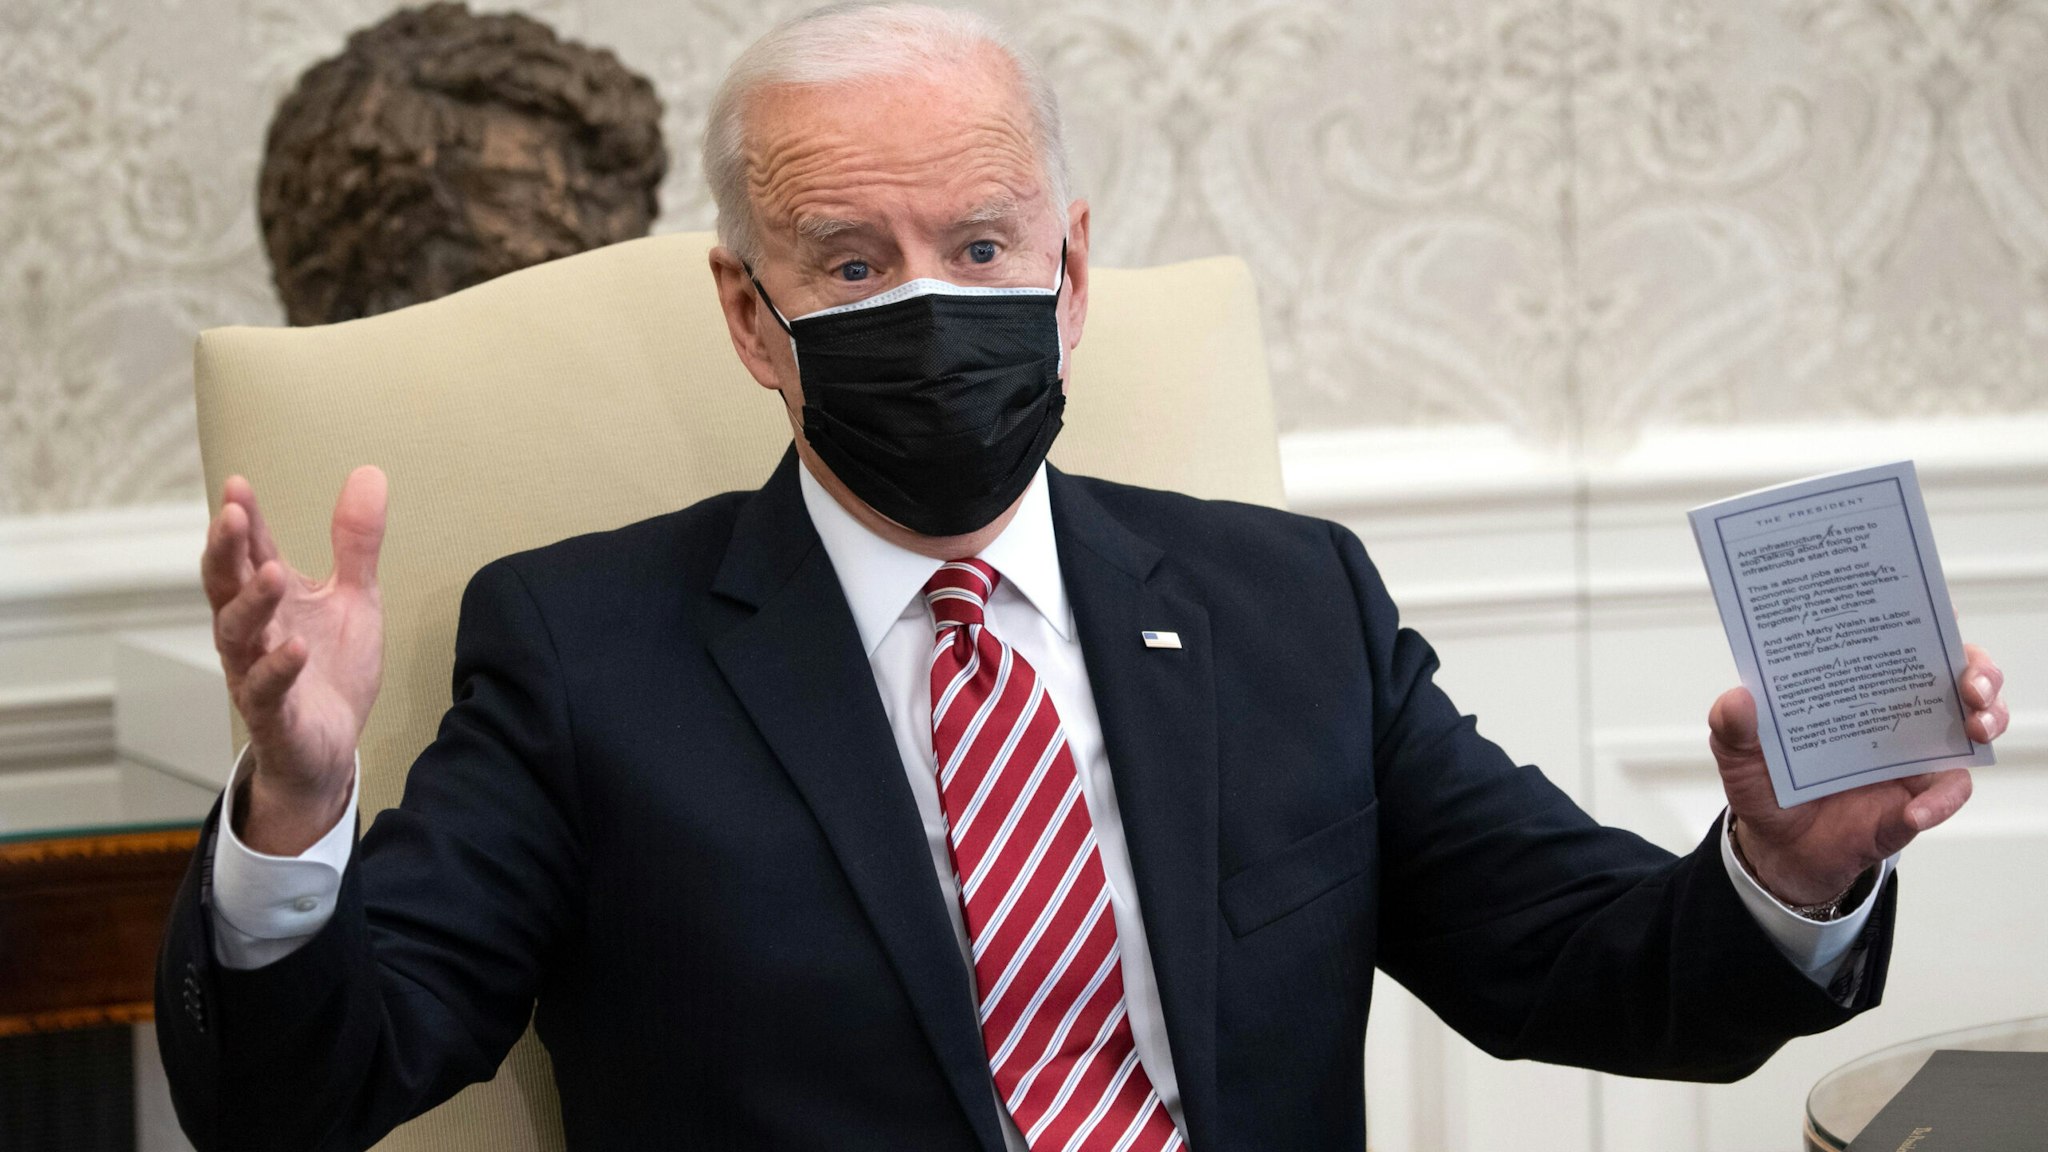 US President Joe Biden speaks during a meeting with labor leaders about the American Rescue Plan, the administration's coronavirus response bill, in the Oval Office of the White House in Washington, DC, on February 17, 2021.